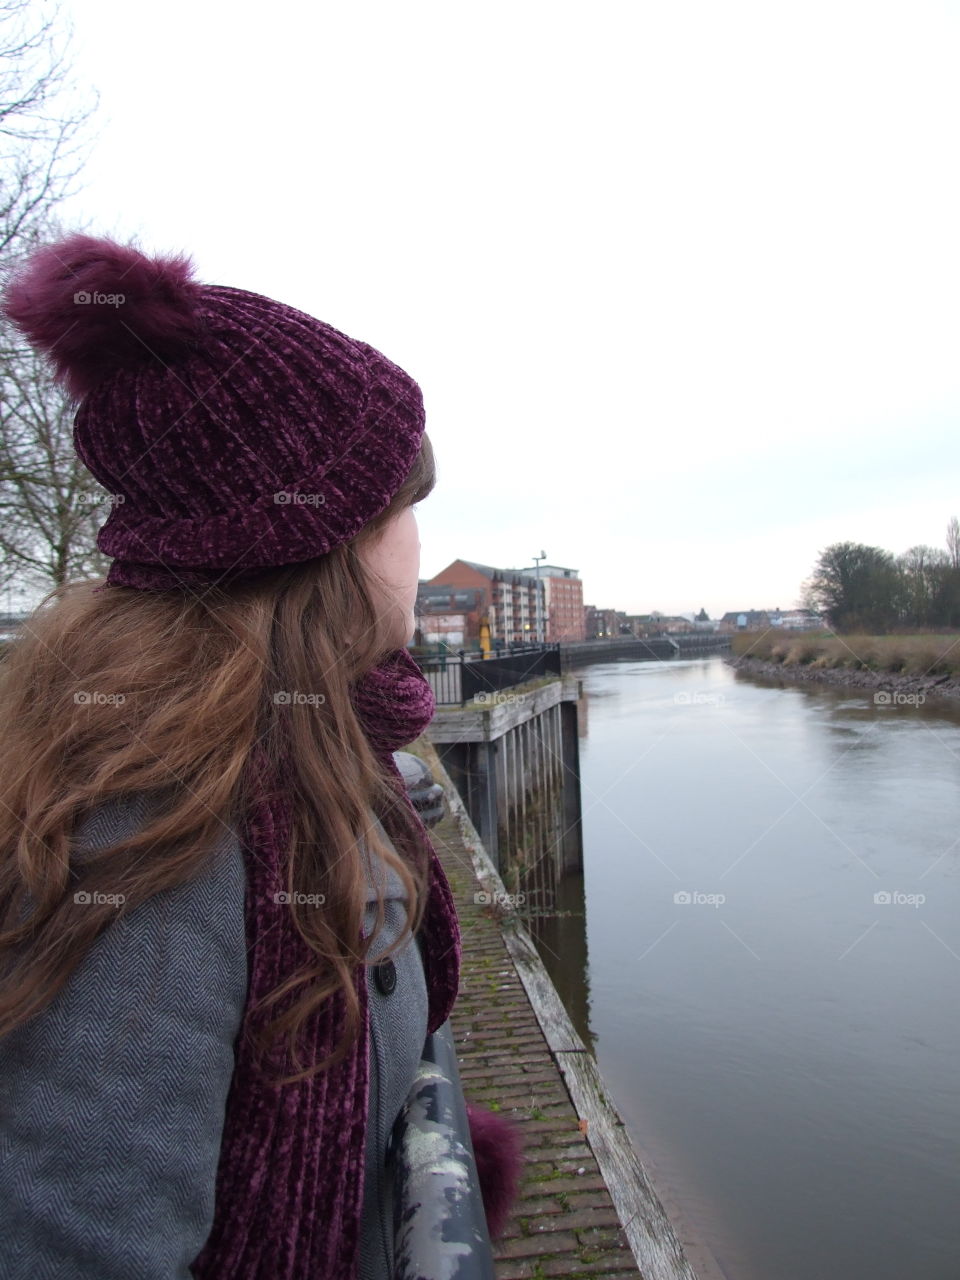 Gazing at the River Trent